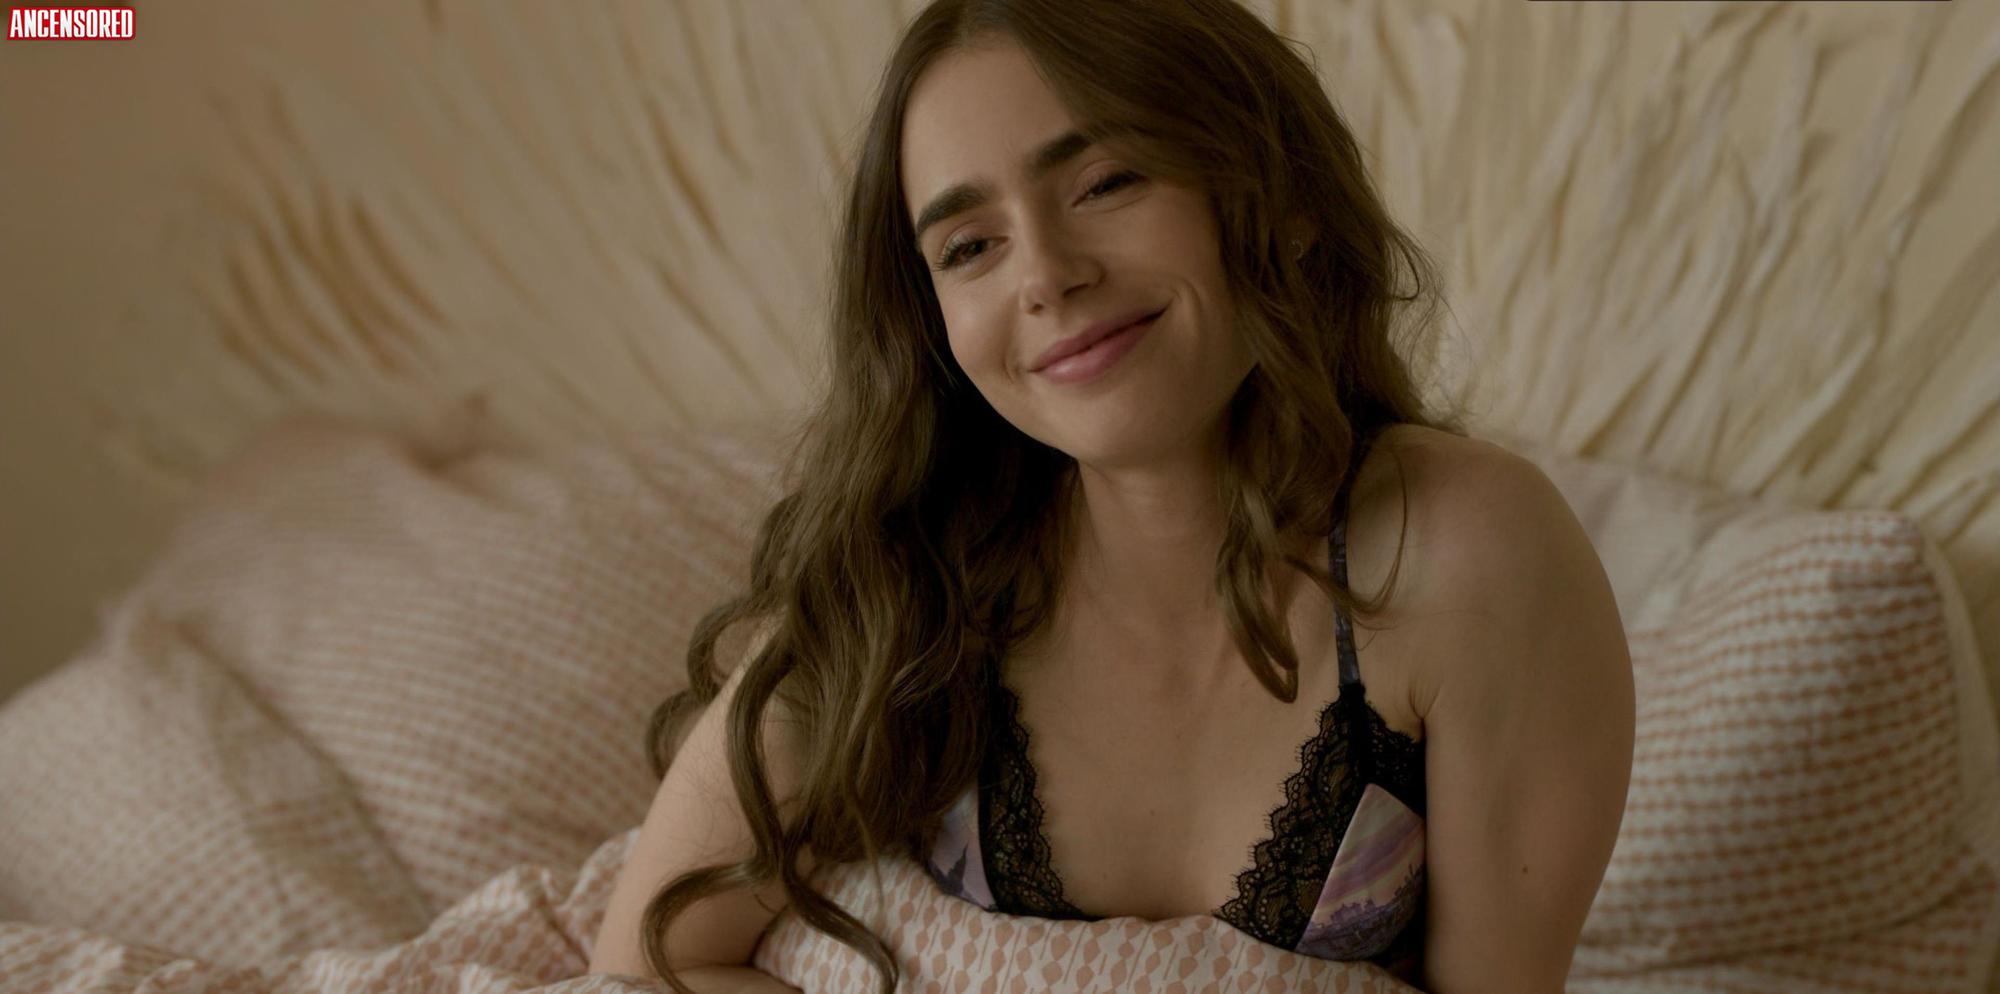 Nude pics of lily collins